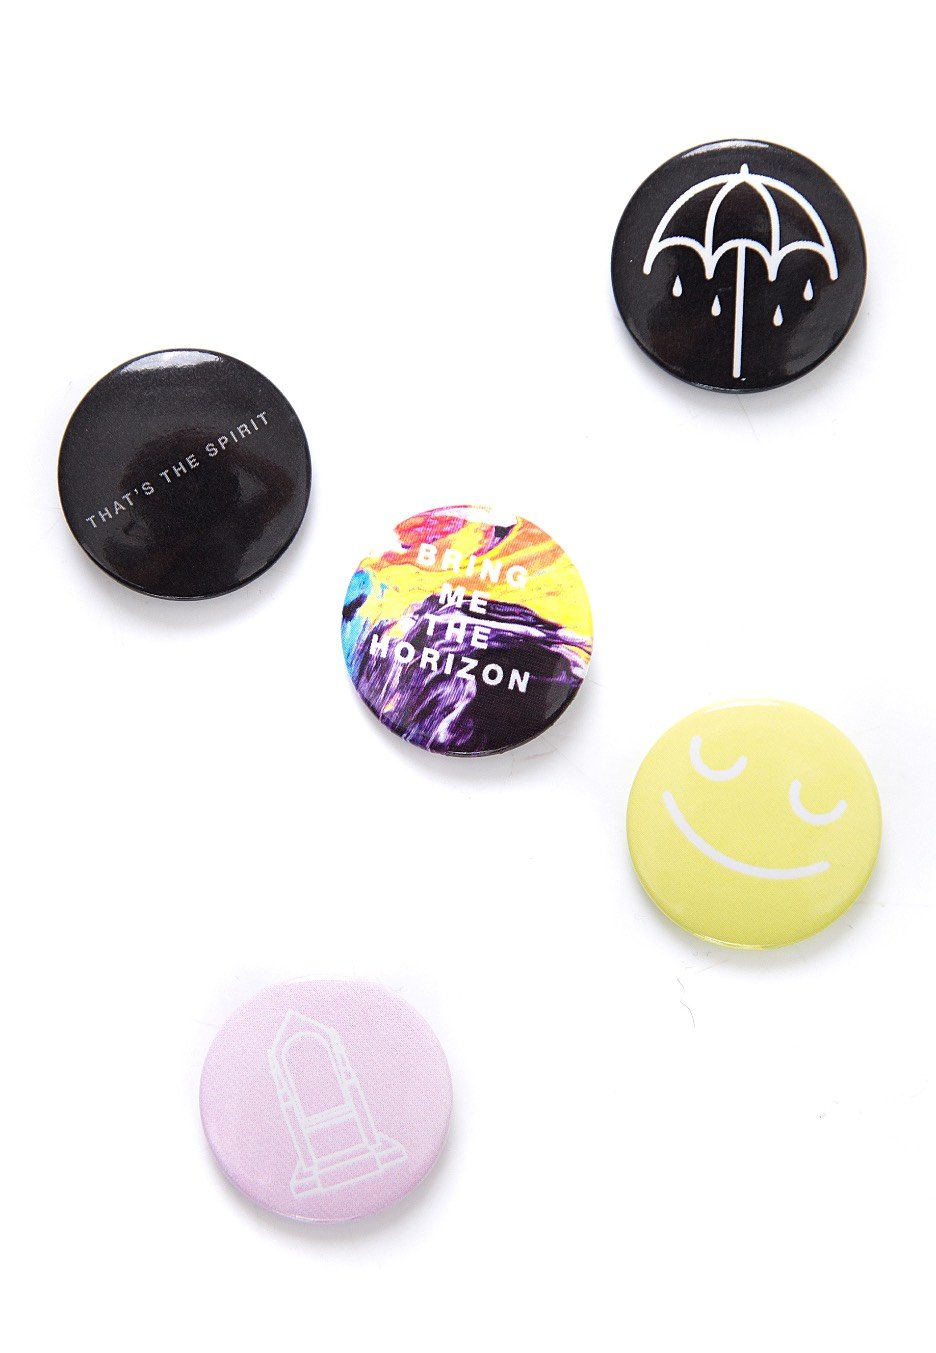 Bring Me The Horizon - Pack of 5 - Button Set